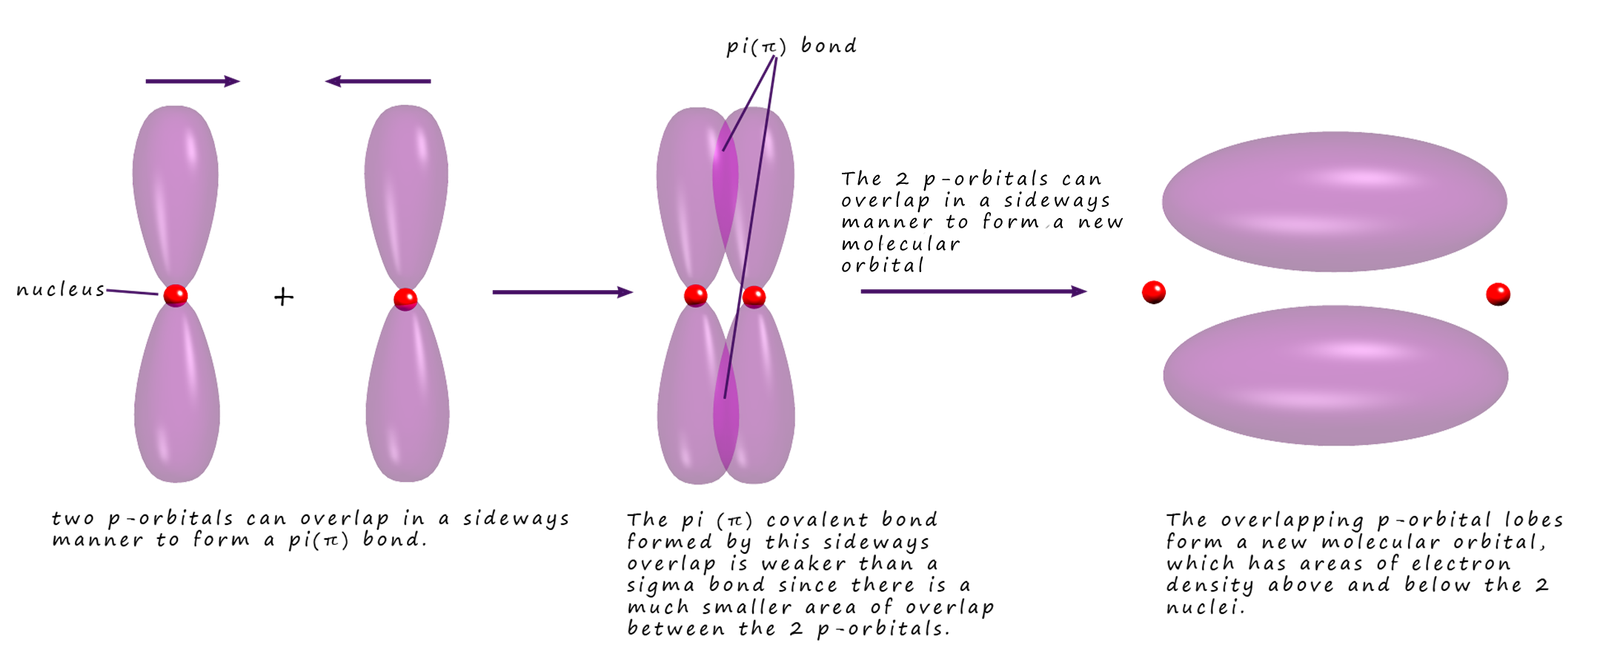 Two p-orbitals can overlap in a partial or sideways manner to form a pi bond.